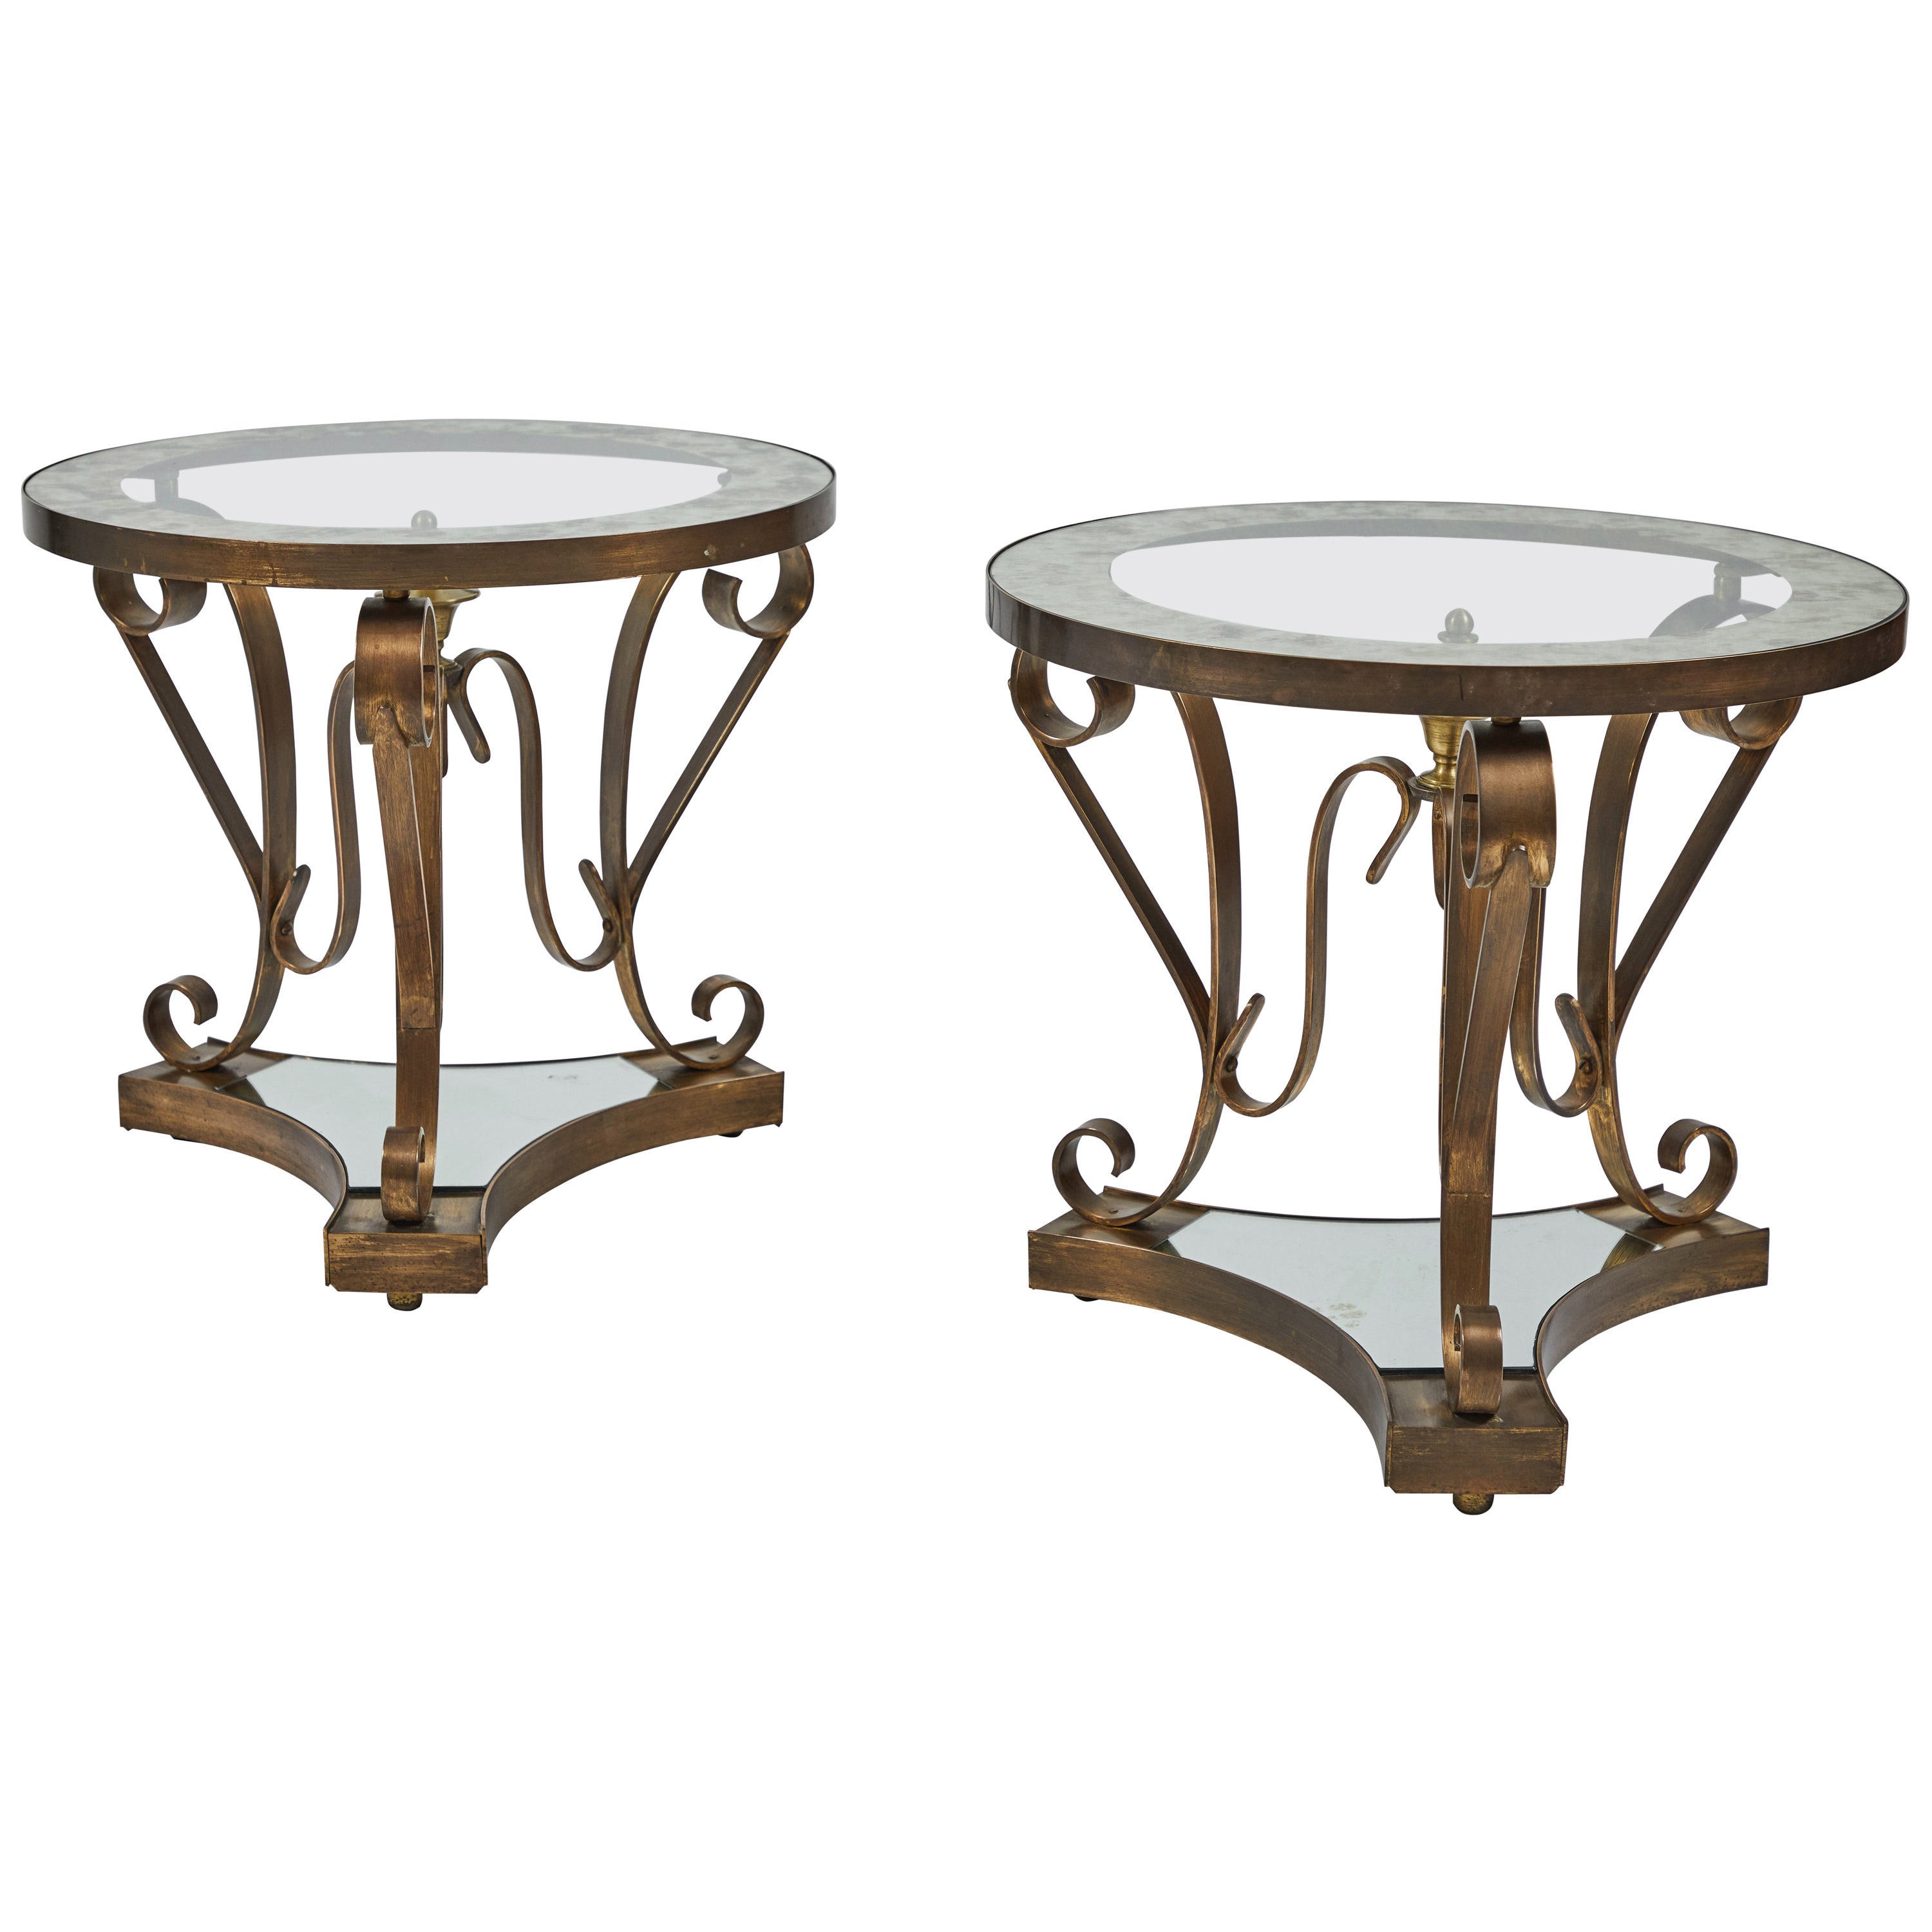 Pair of Patinated Brass and Mirrored Side Tables by Arturo Pani For Sale